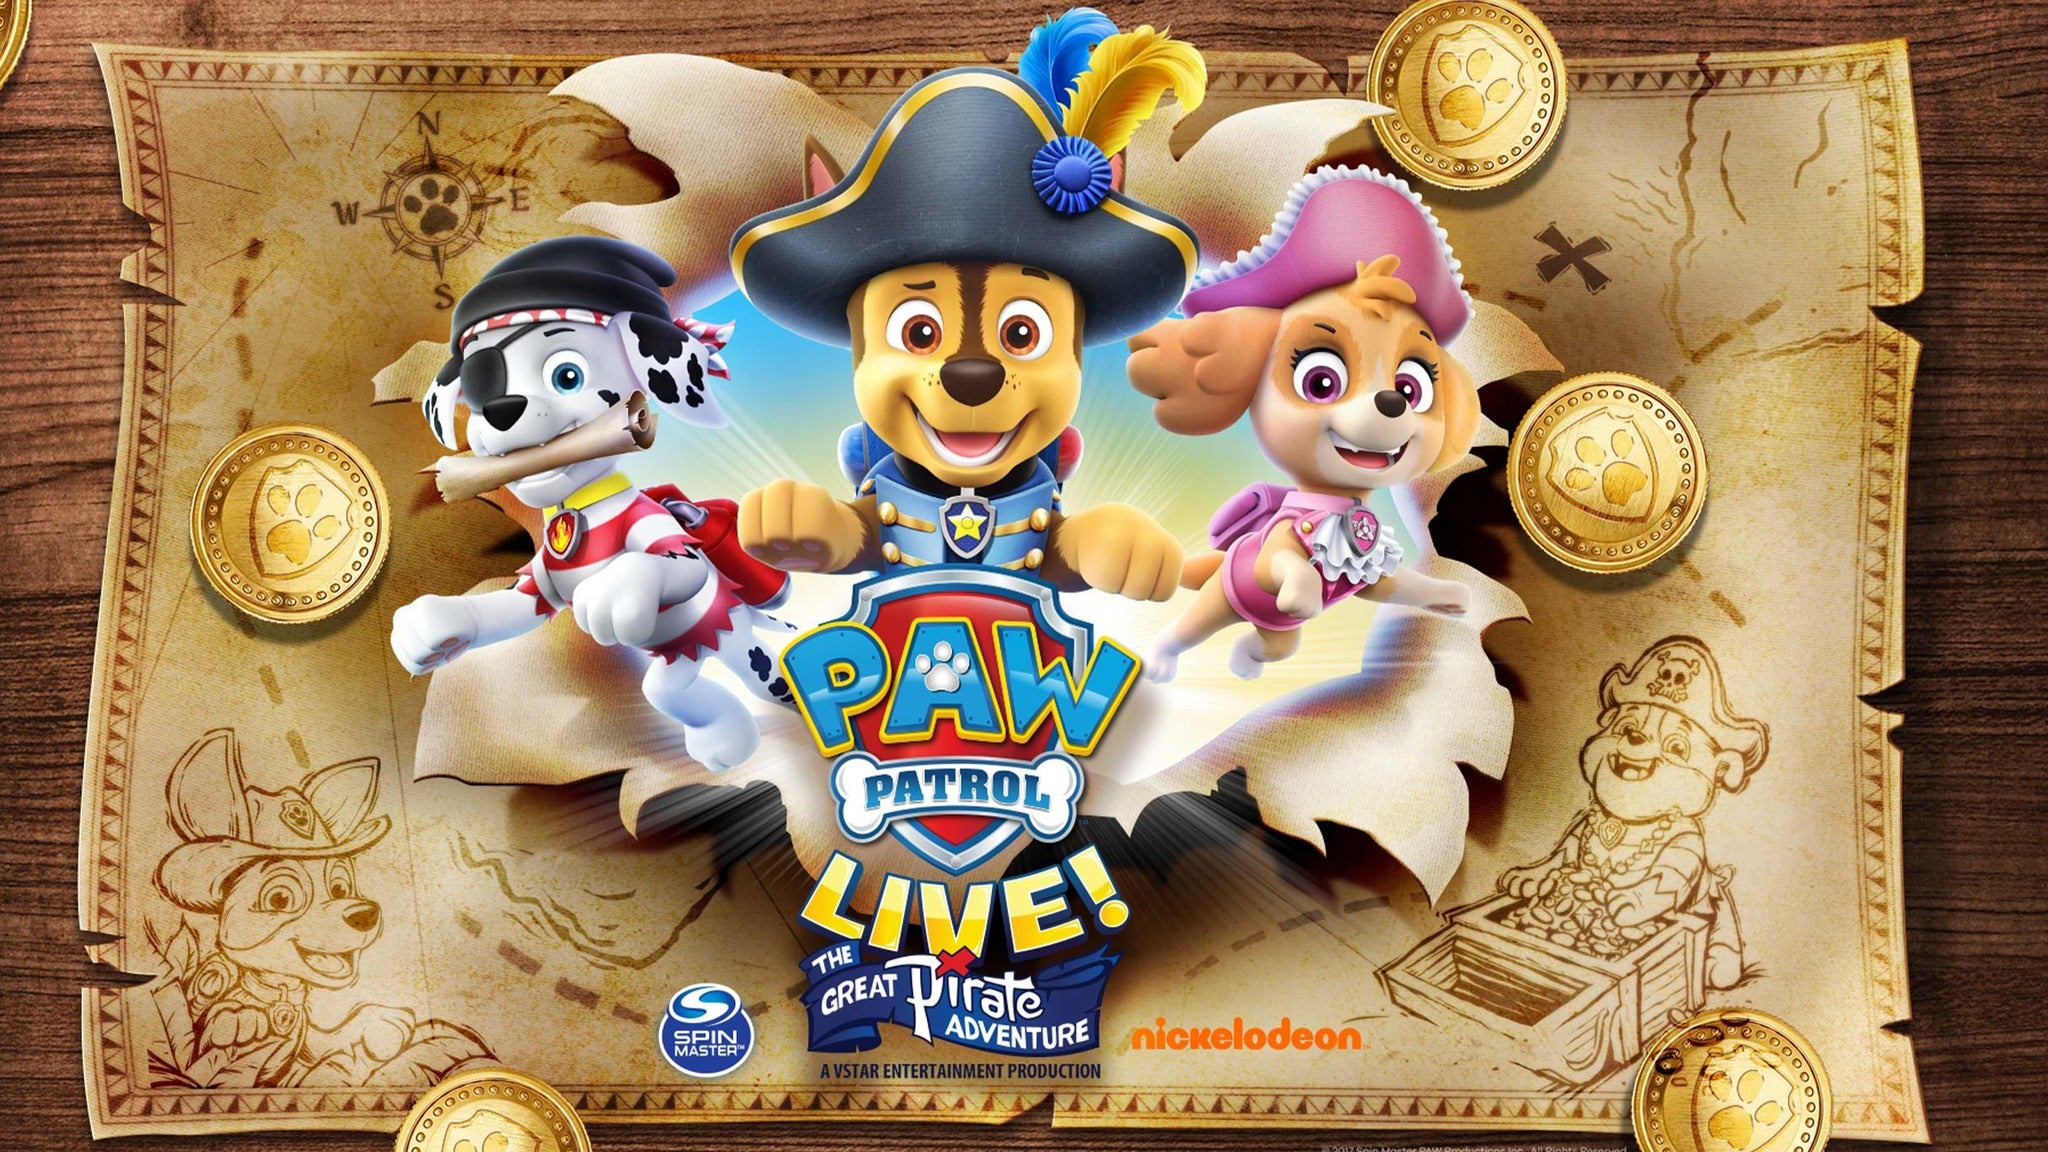 PAW Patrol Live! The Great Pirate Adventure pre-sale password